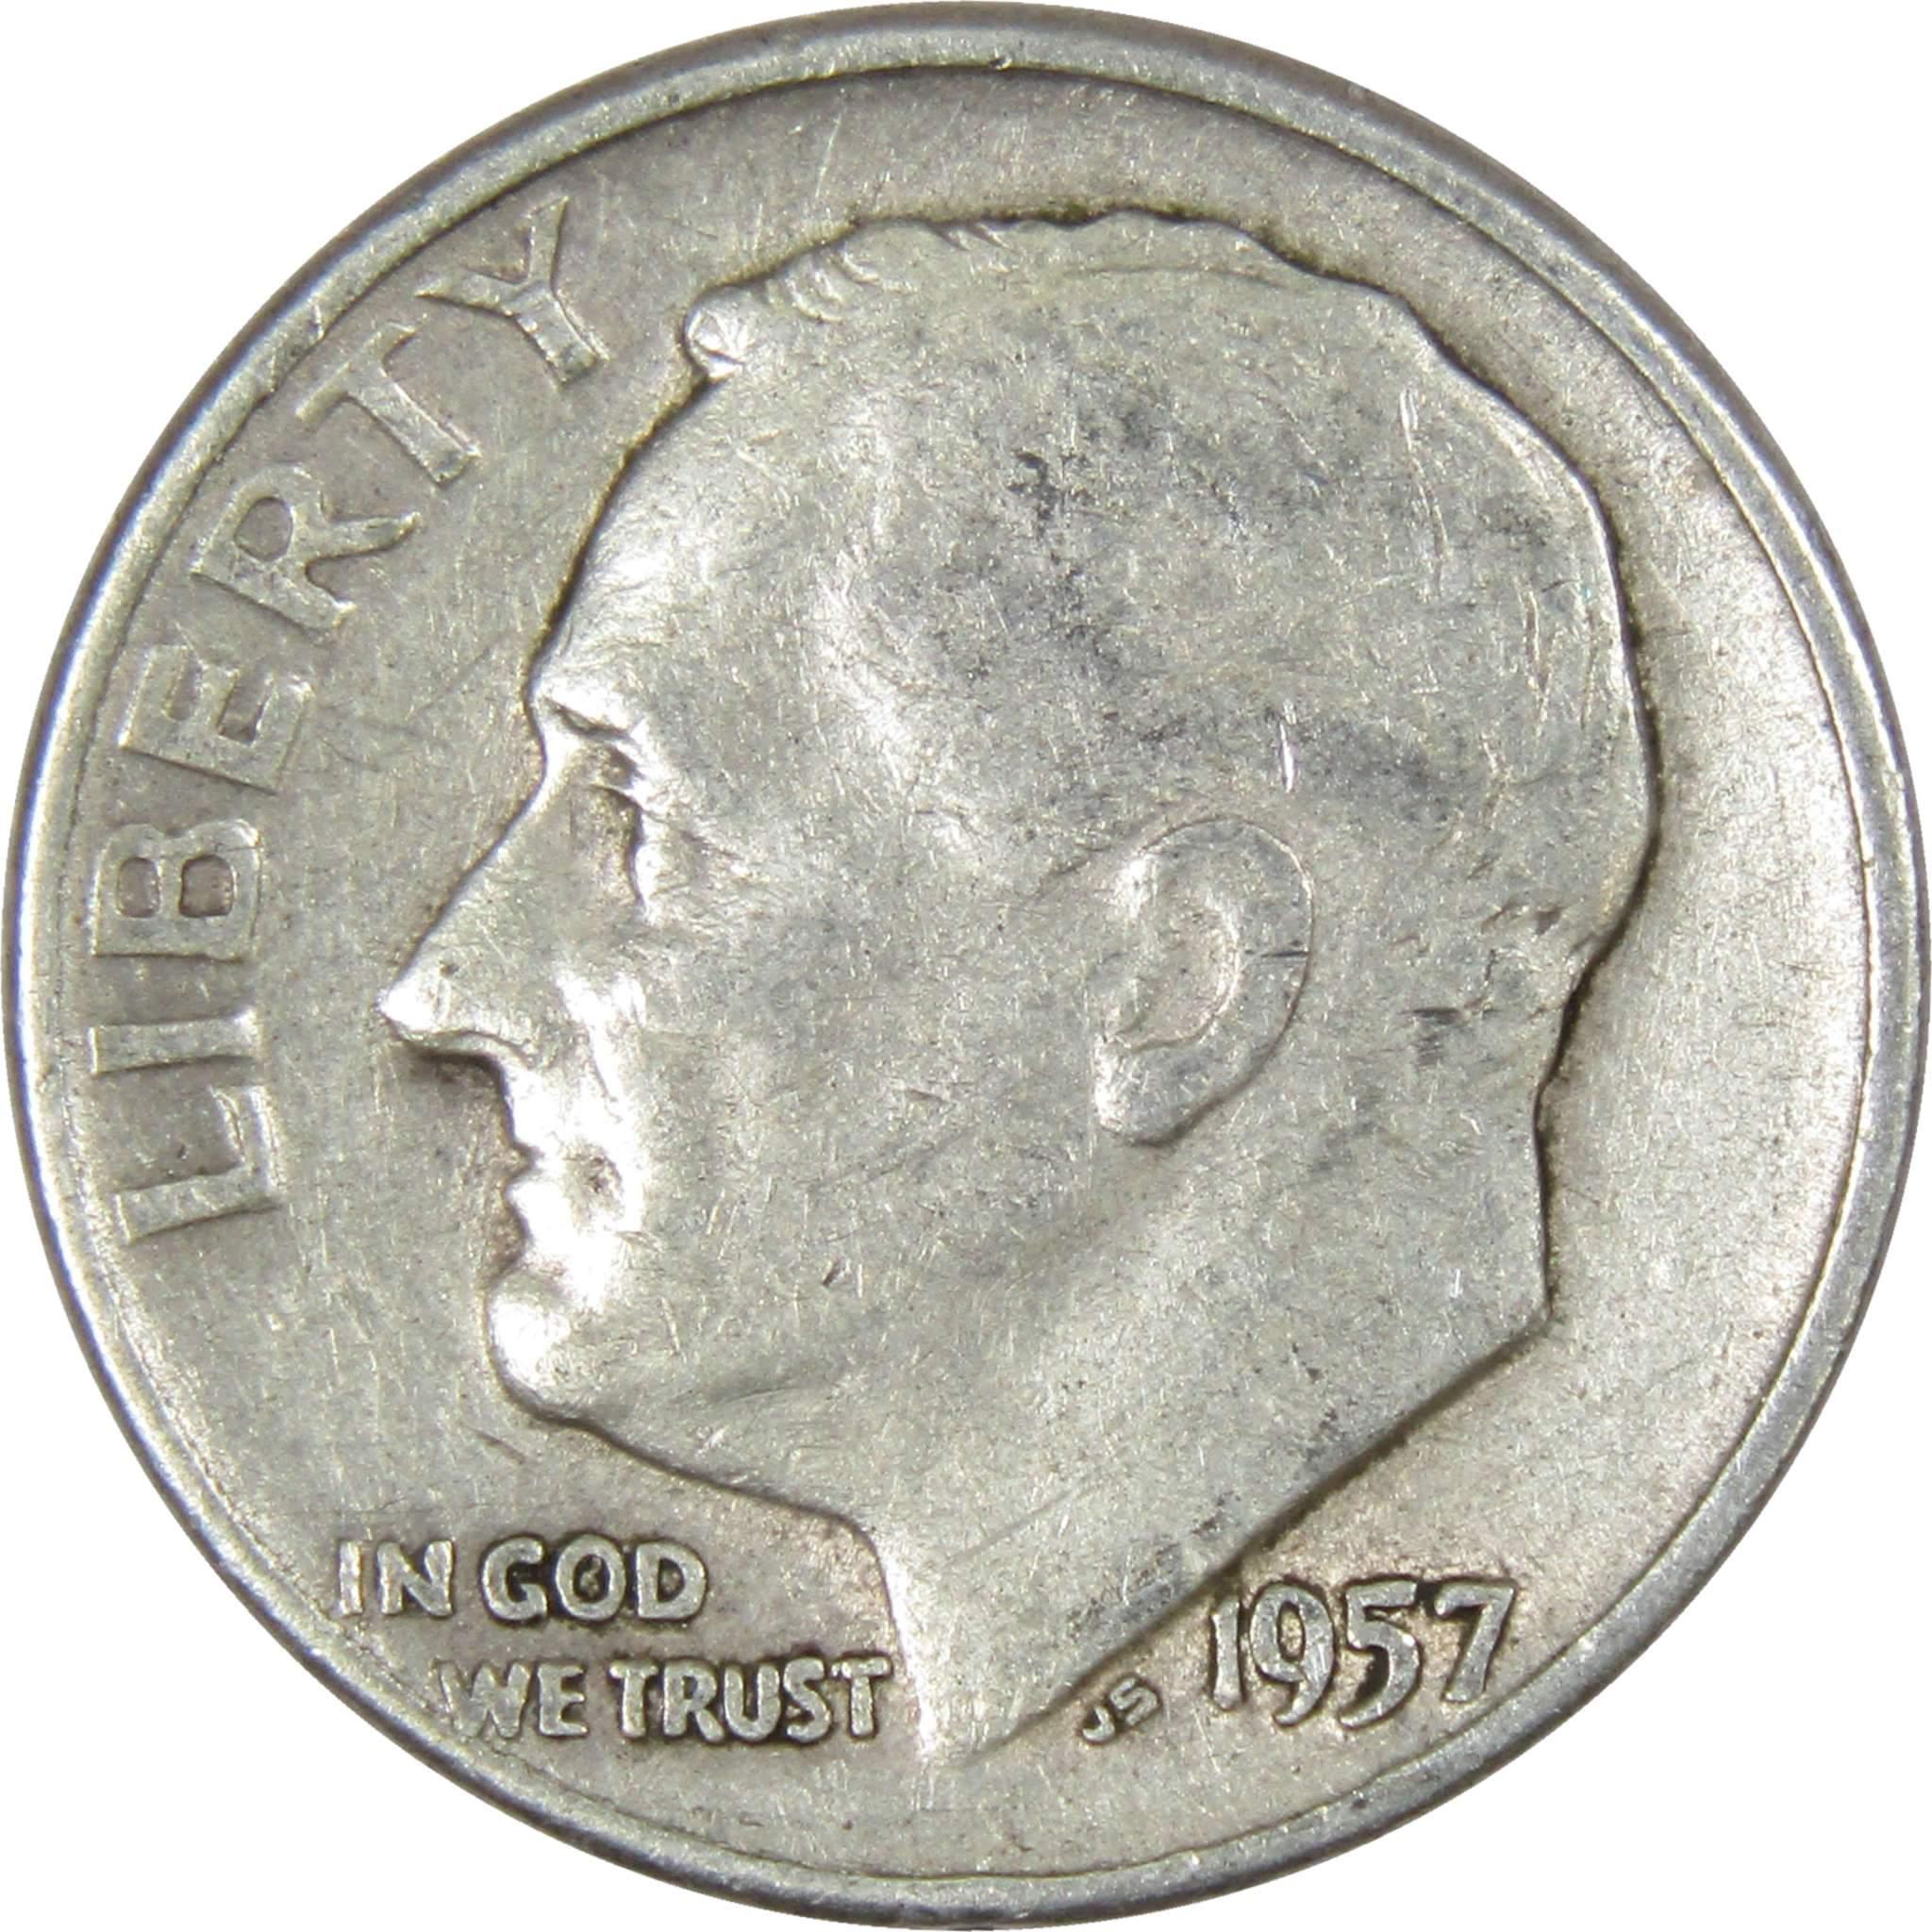 1957 D Roosevelt Dime AG About Good 90% Silver 10c US Coin Collectible